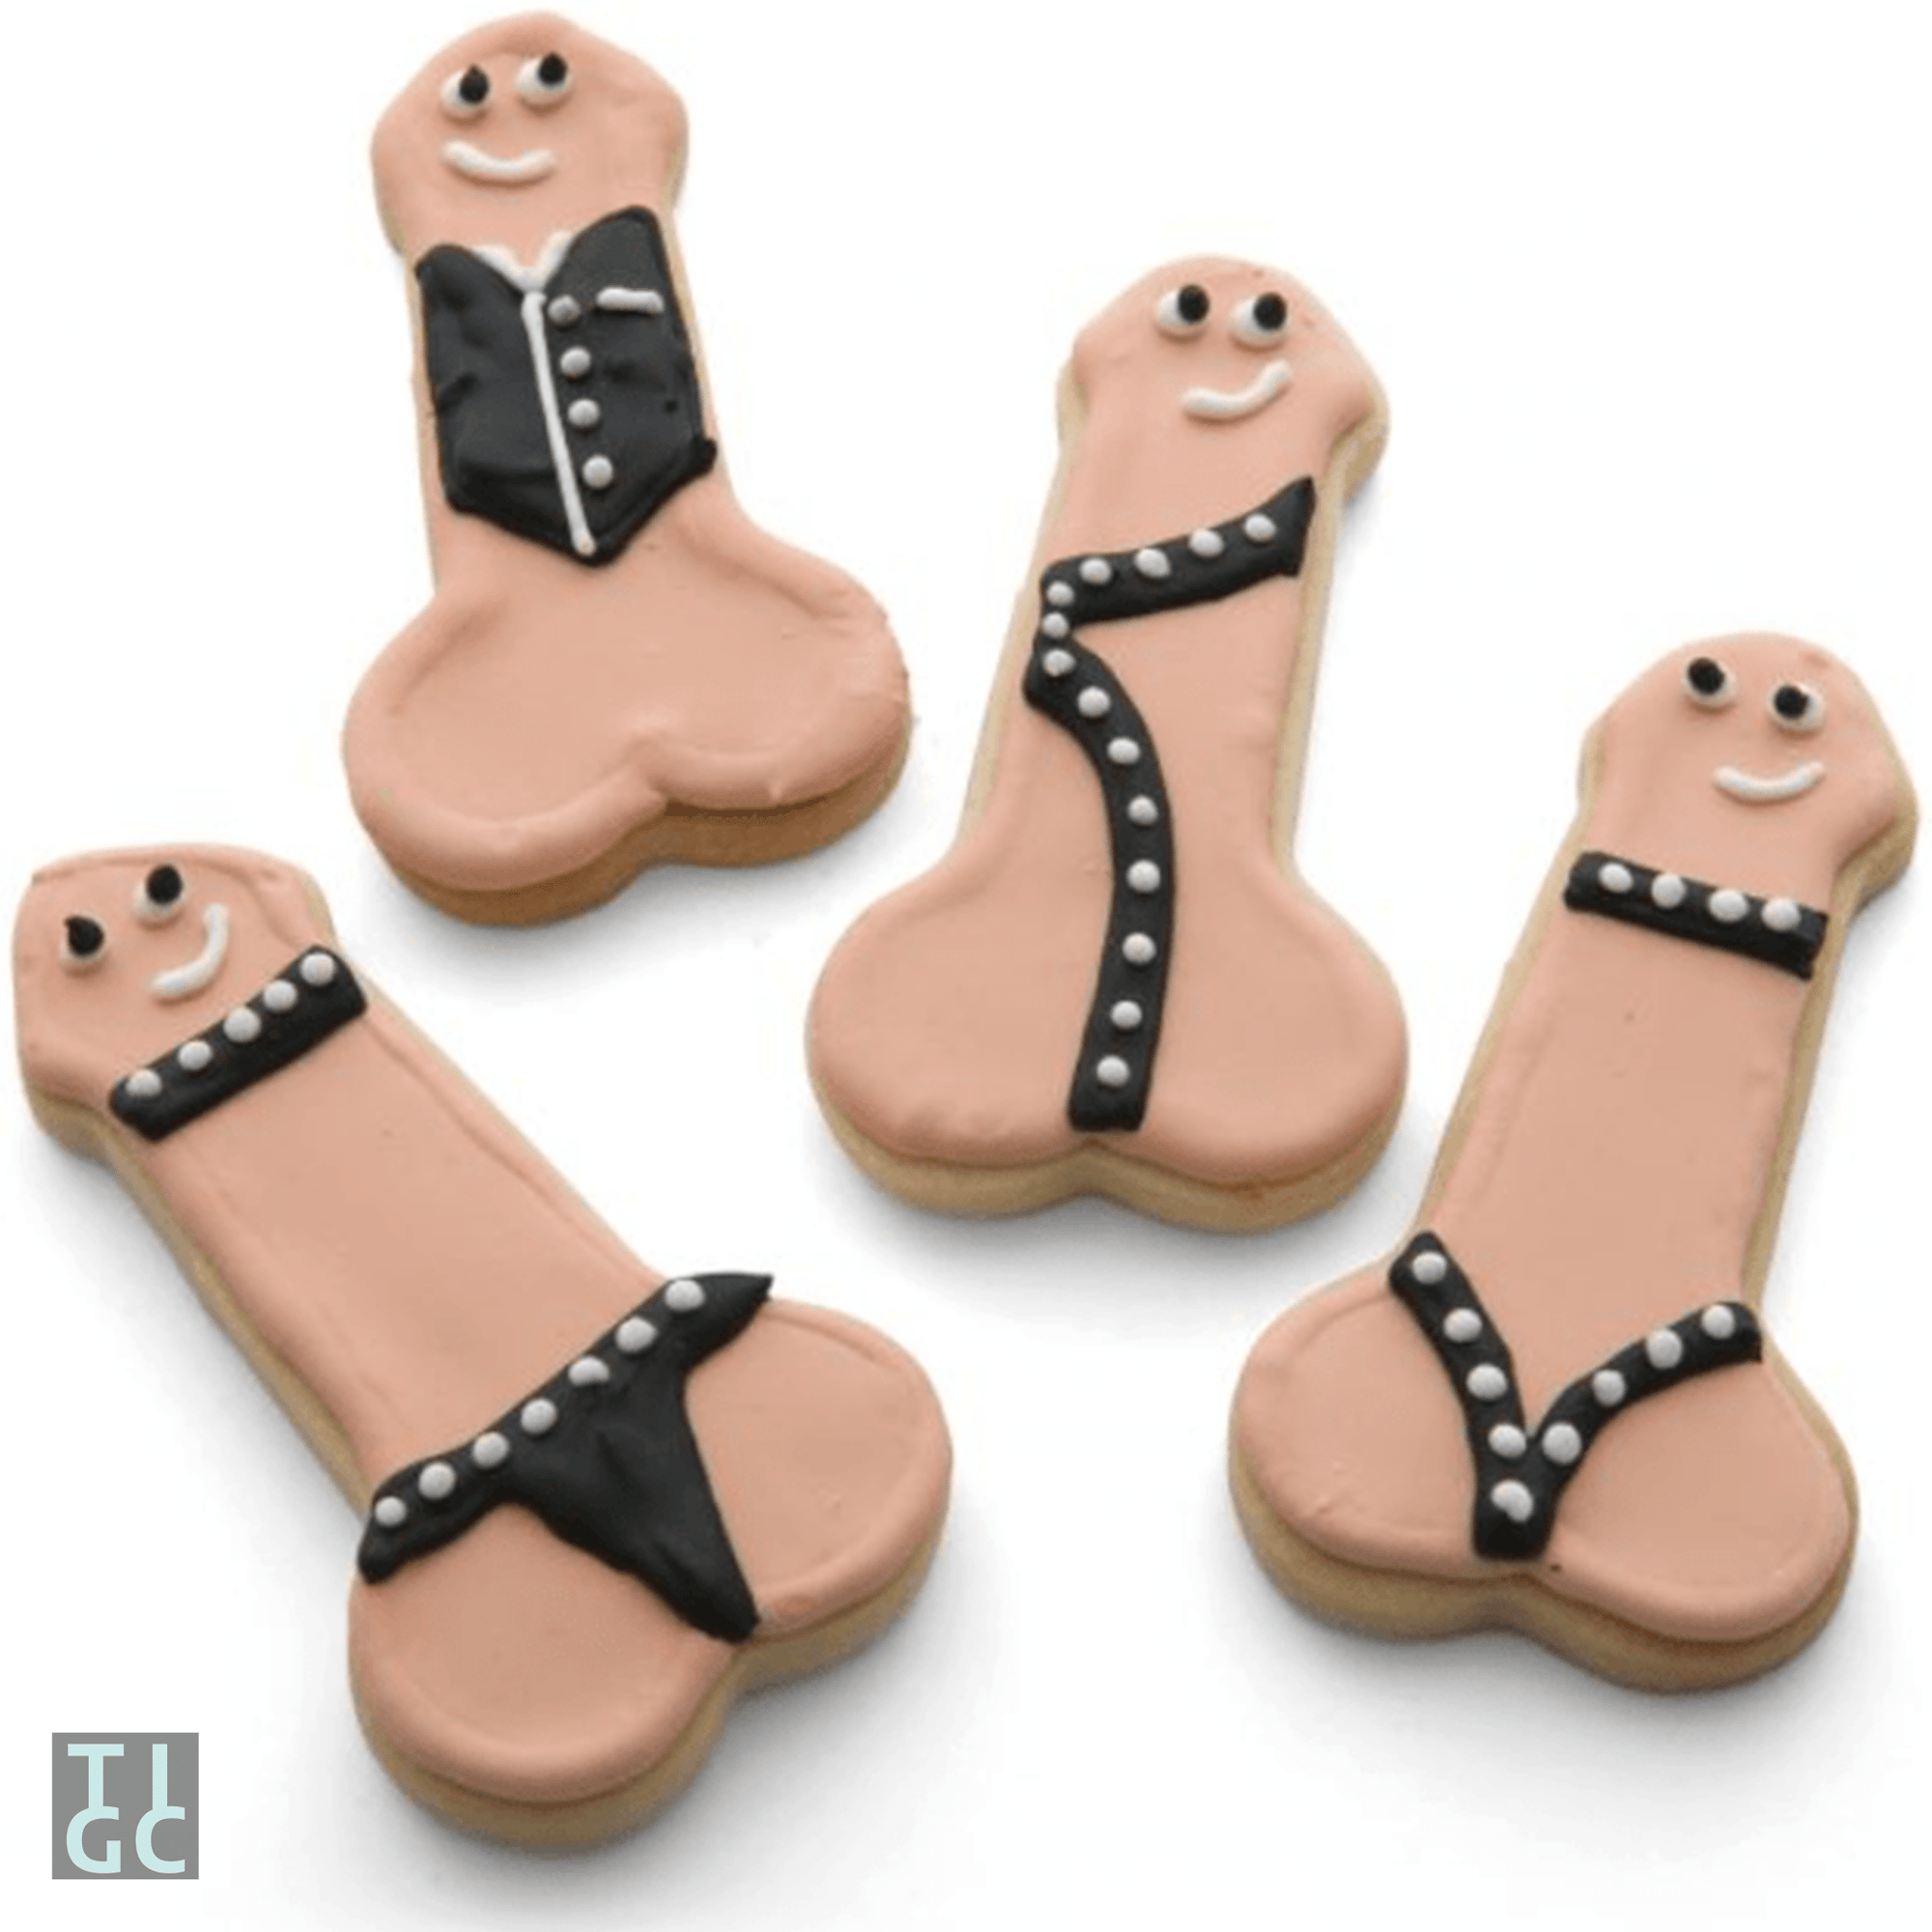 TIGC The Inappropriate Gift Co Inappropriate Penis Biscuit Cutters